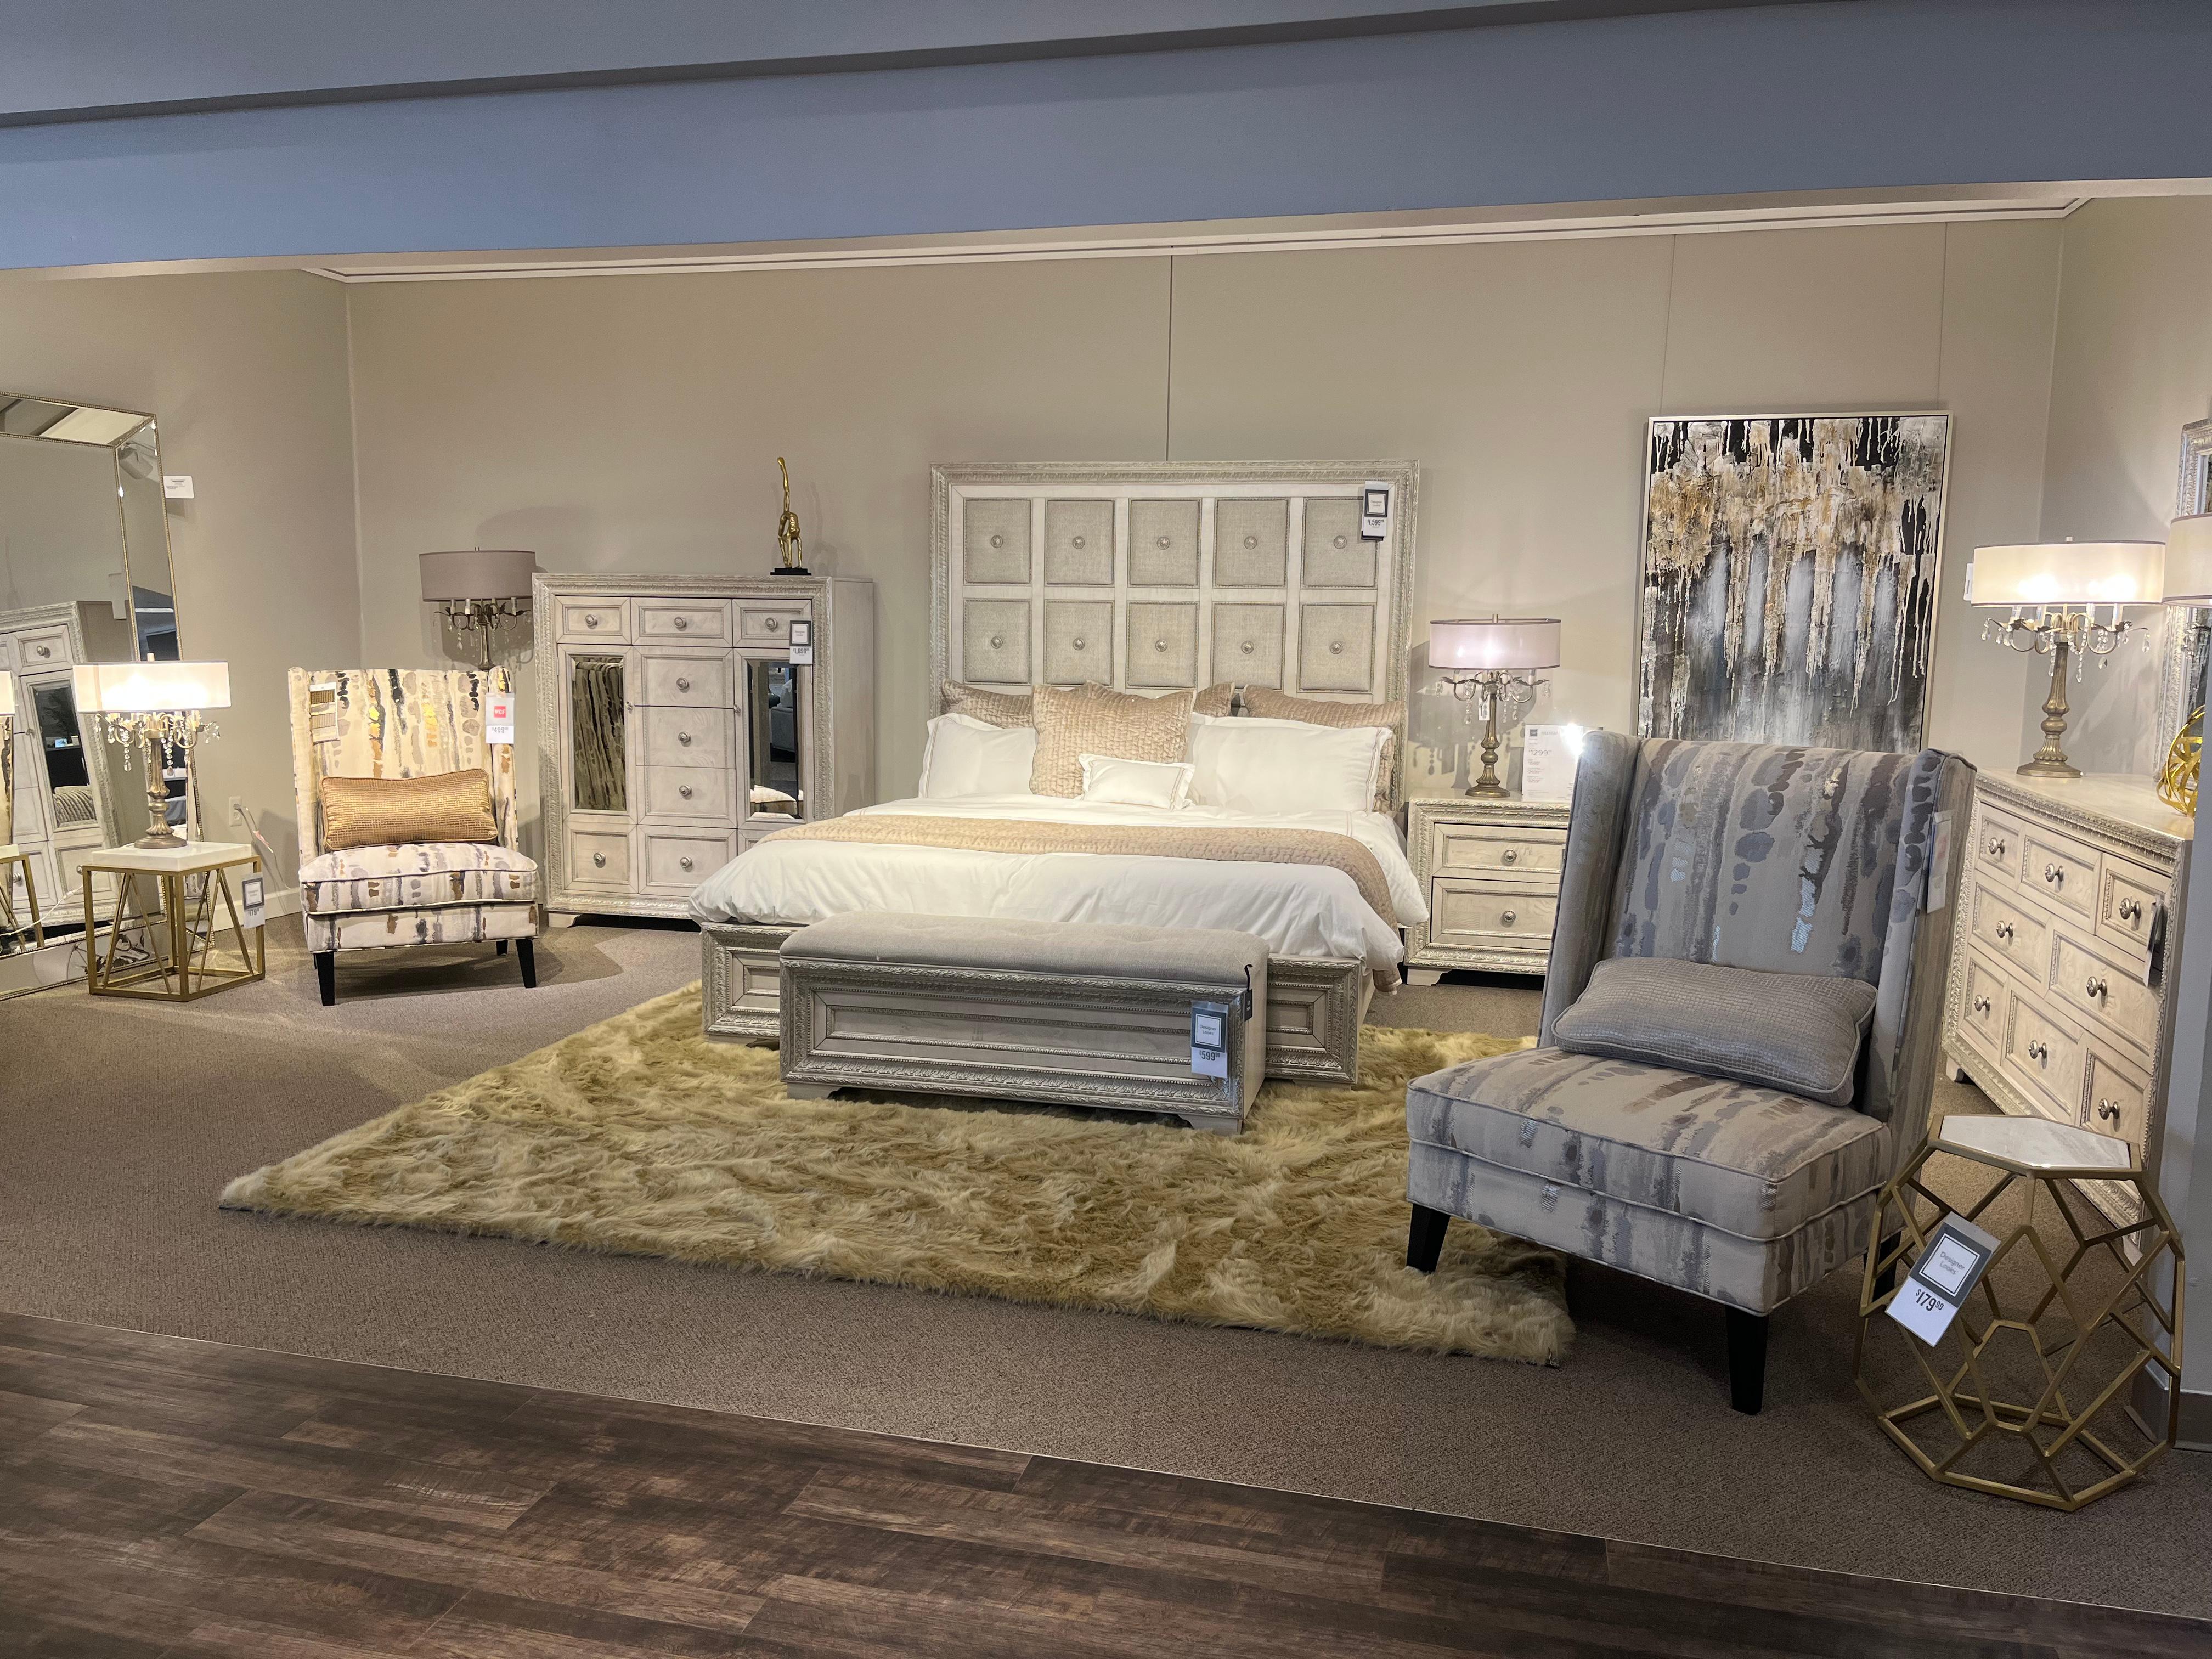 Shop our bedroom collections Value City Furniture Ann Arbor (734)720-1875